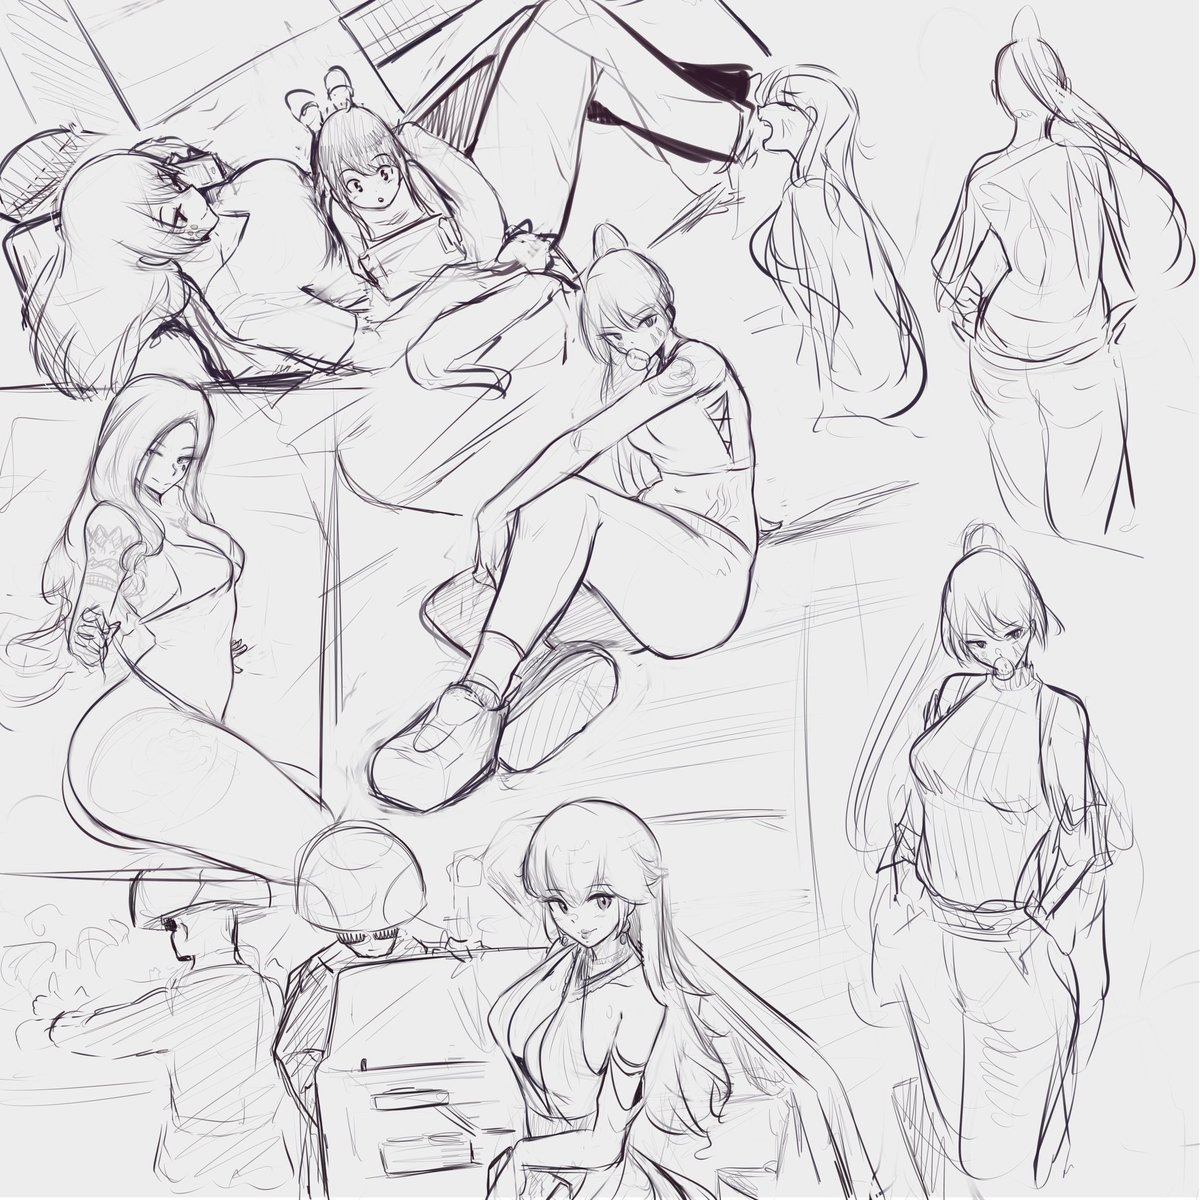 Sketch warmups and ideation. 
Honestly, my favorite past time. Sketch and chilling 